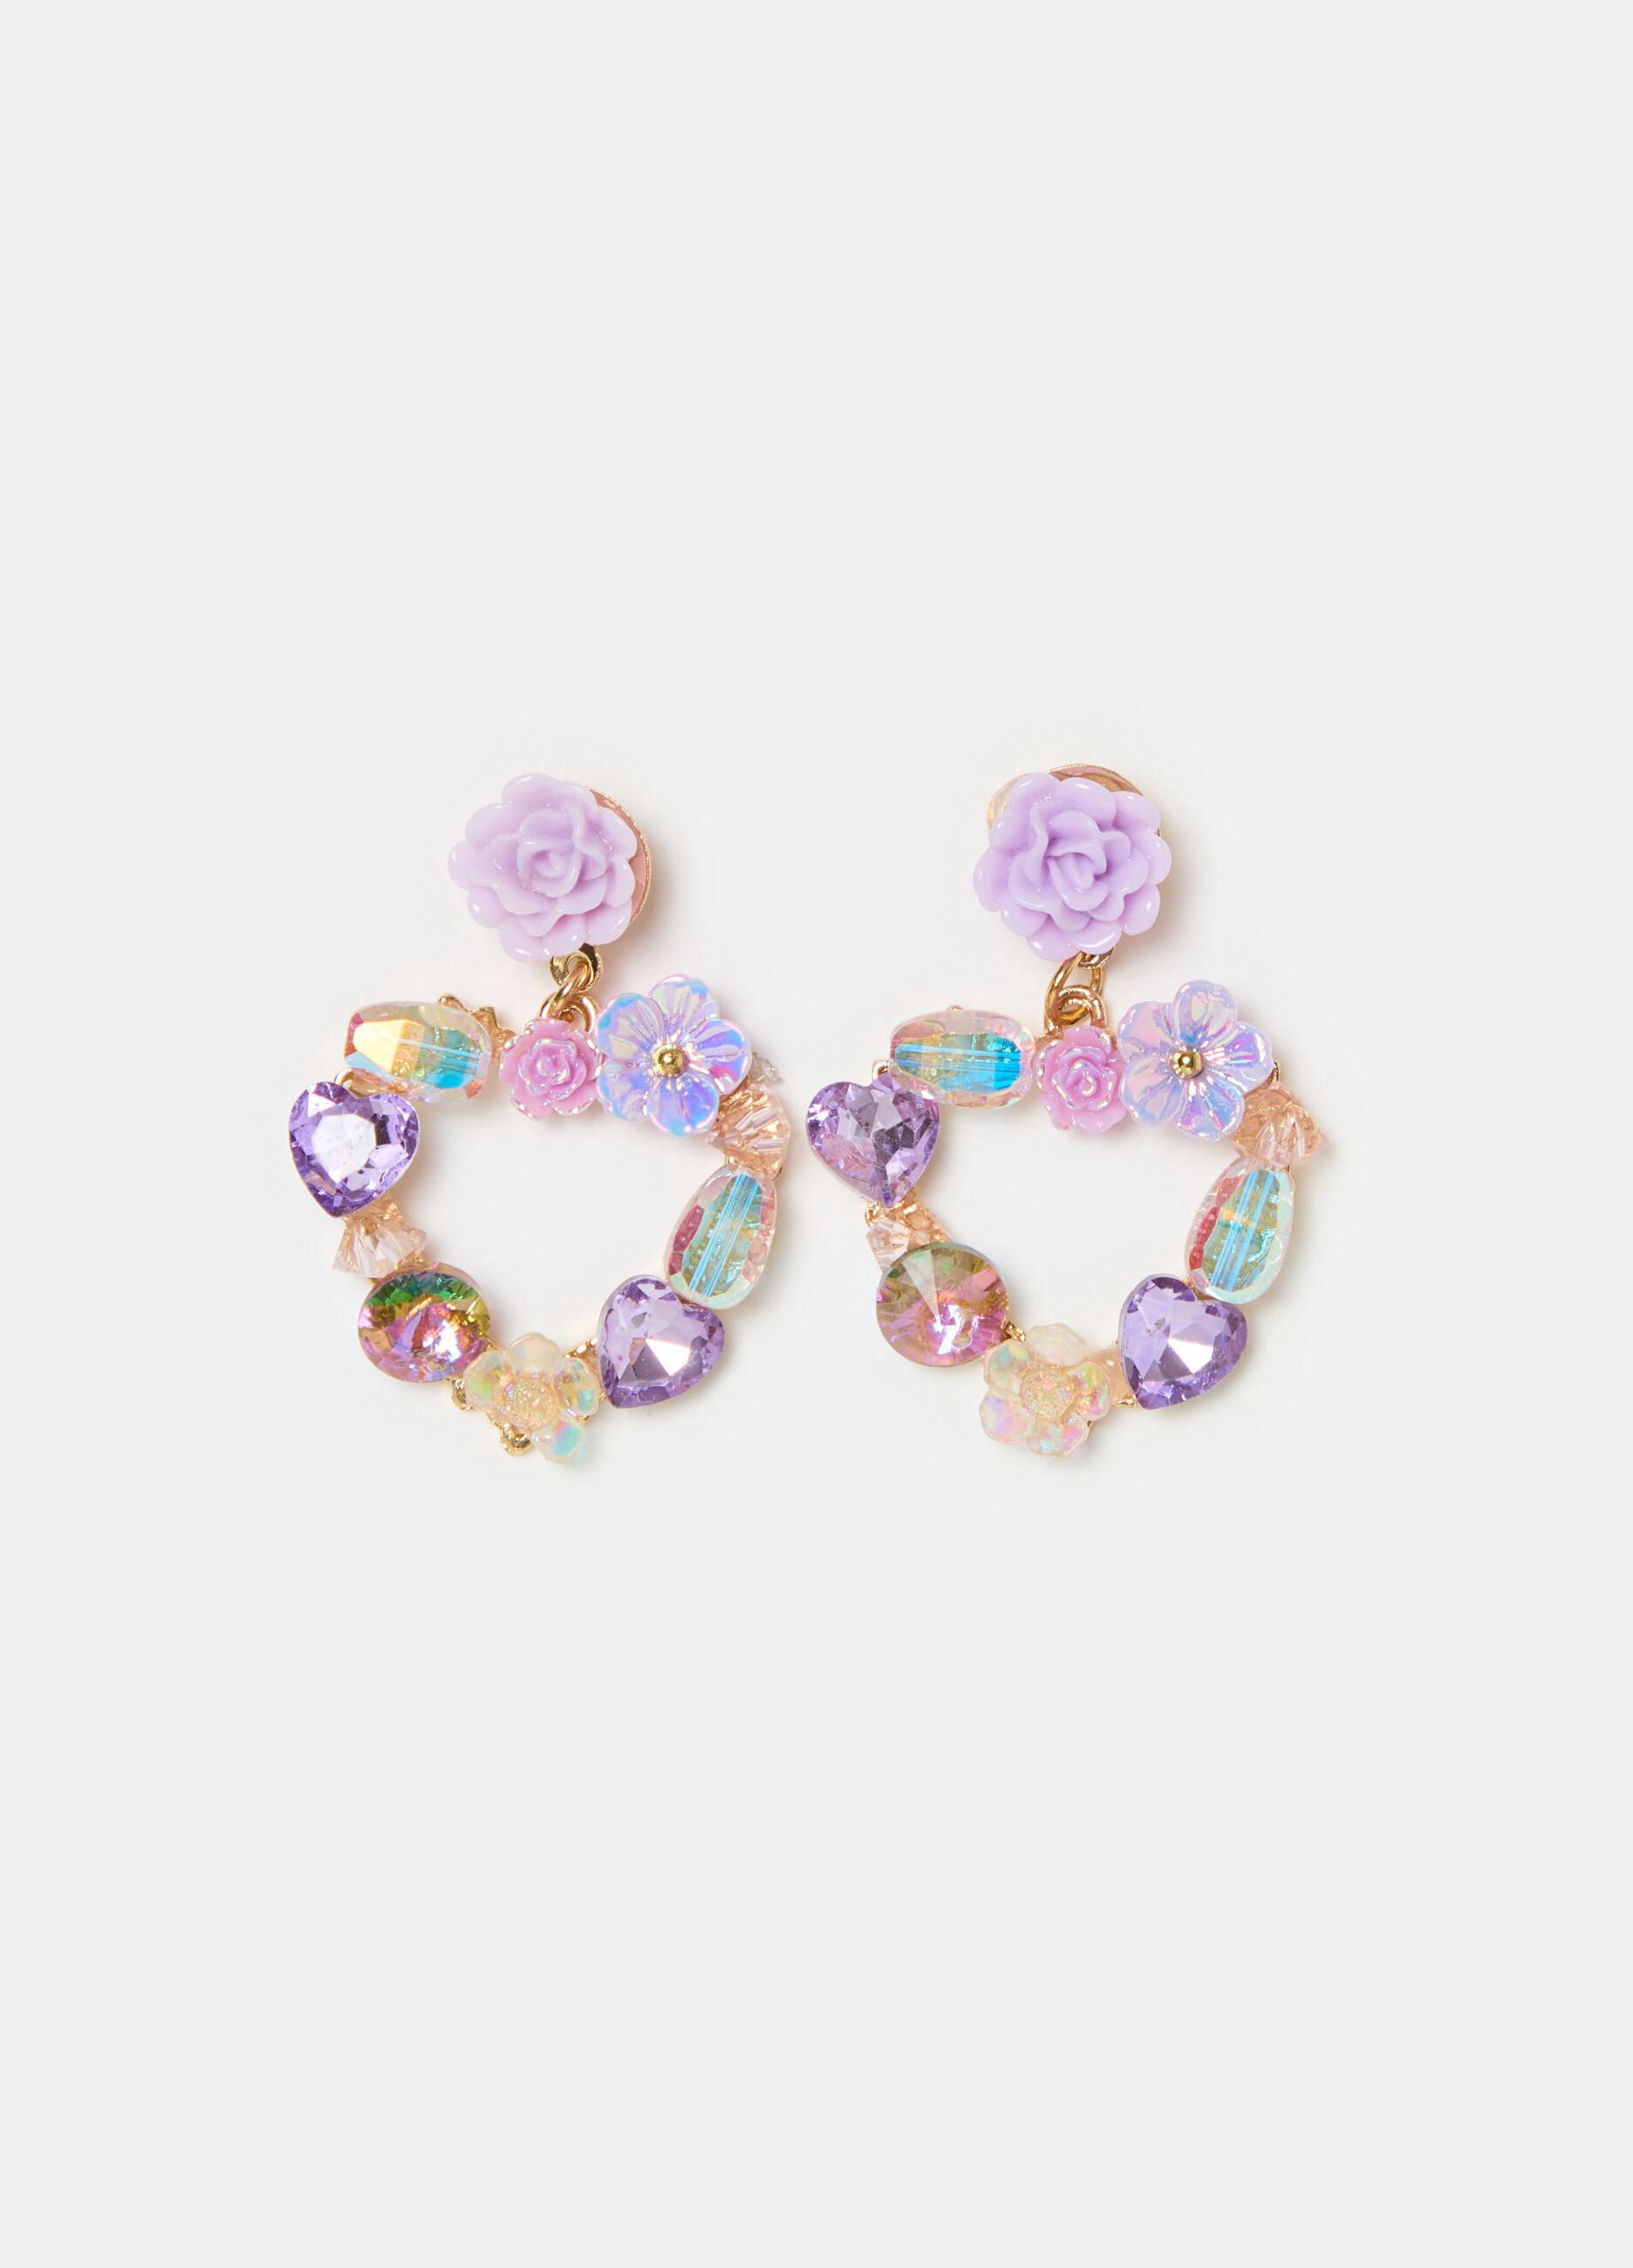 Earrings with heart-shaped pendant and stones